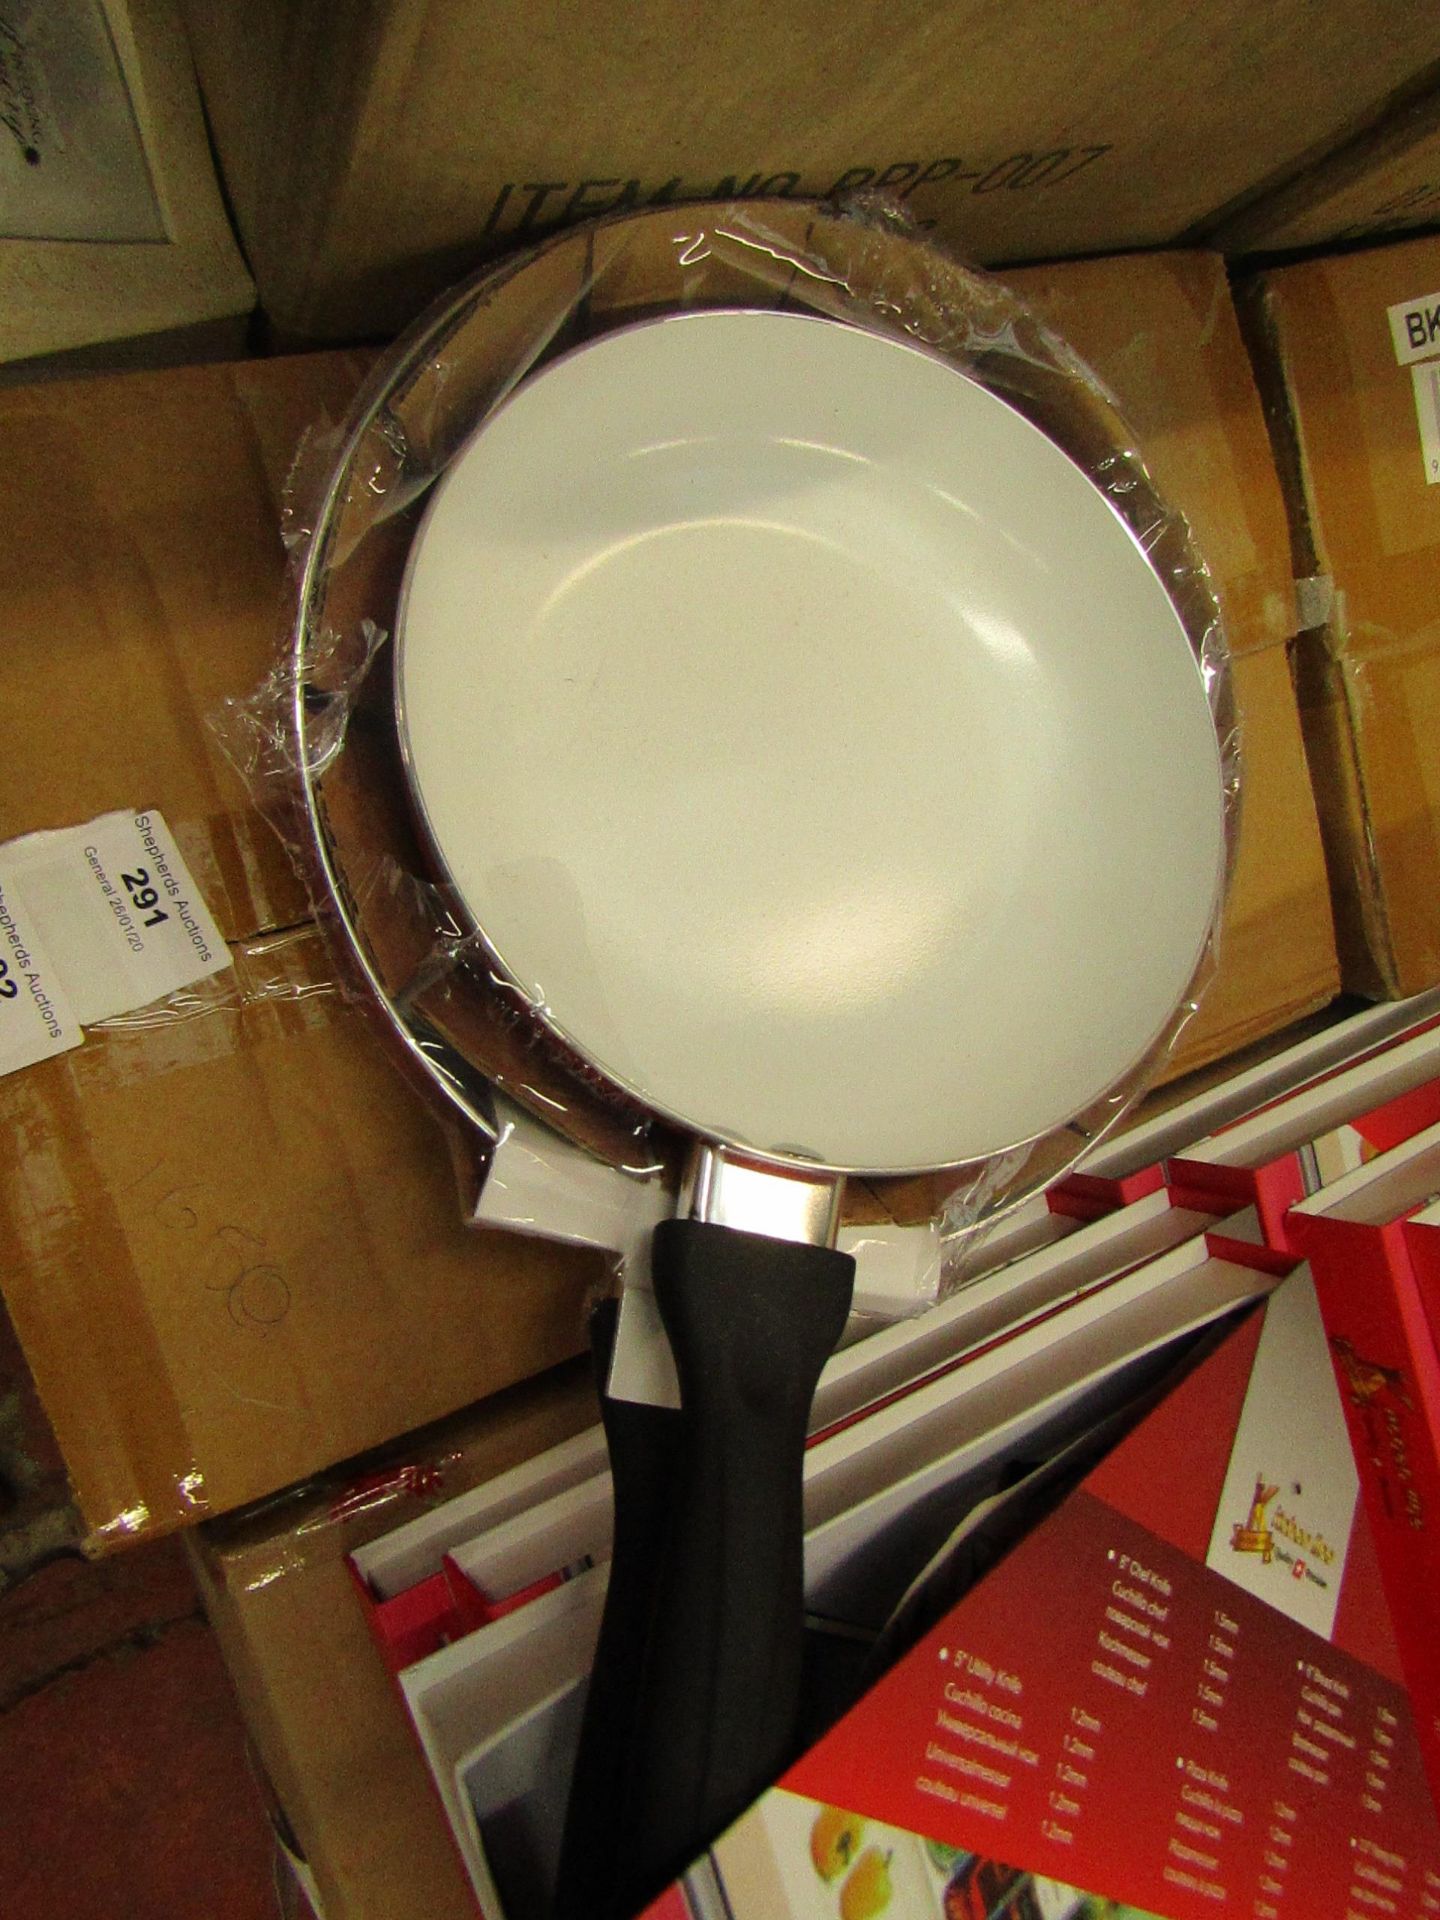 Set of 2 Frying Pans in Red. New & Boxed